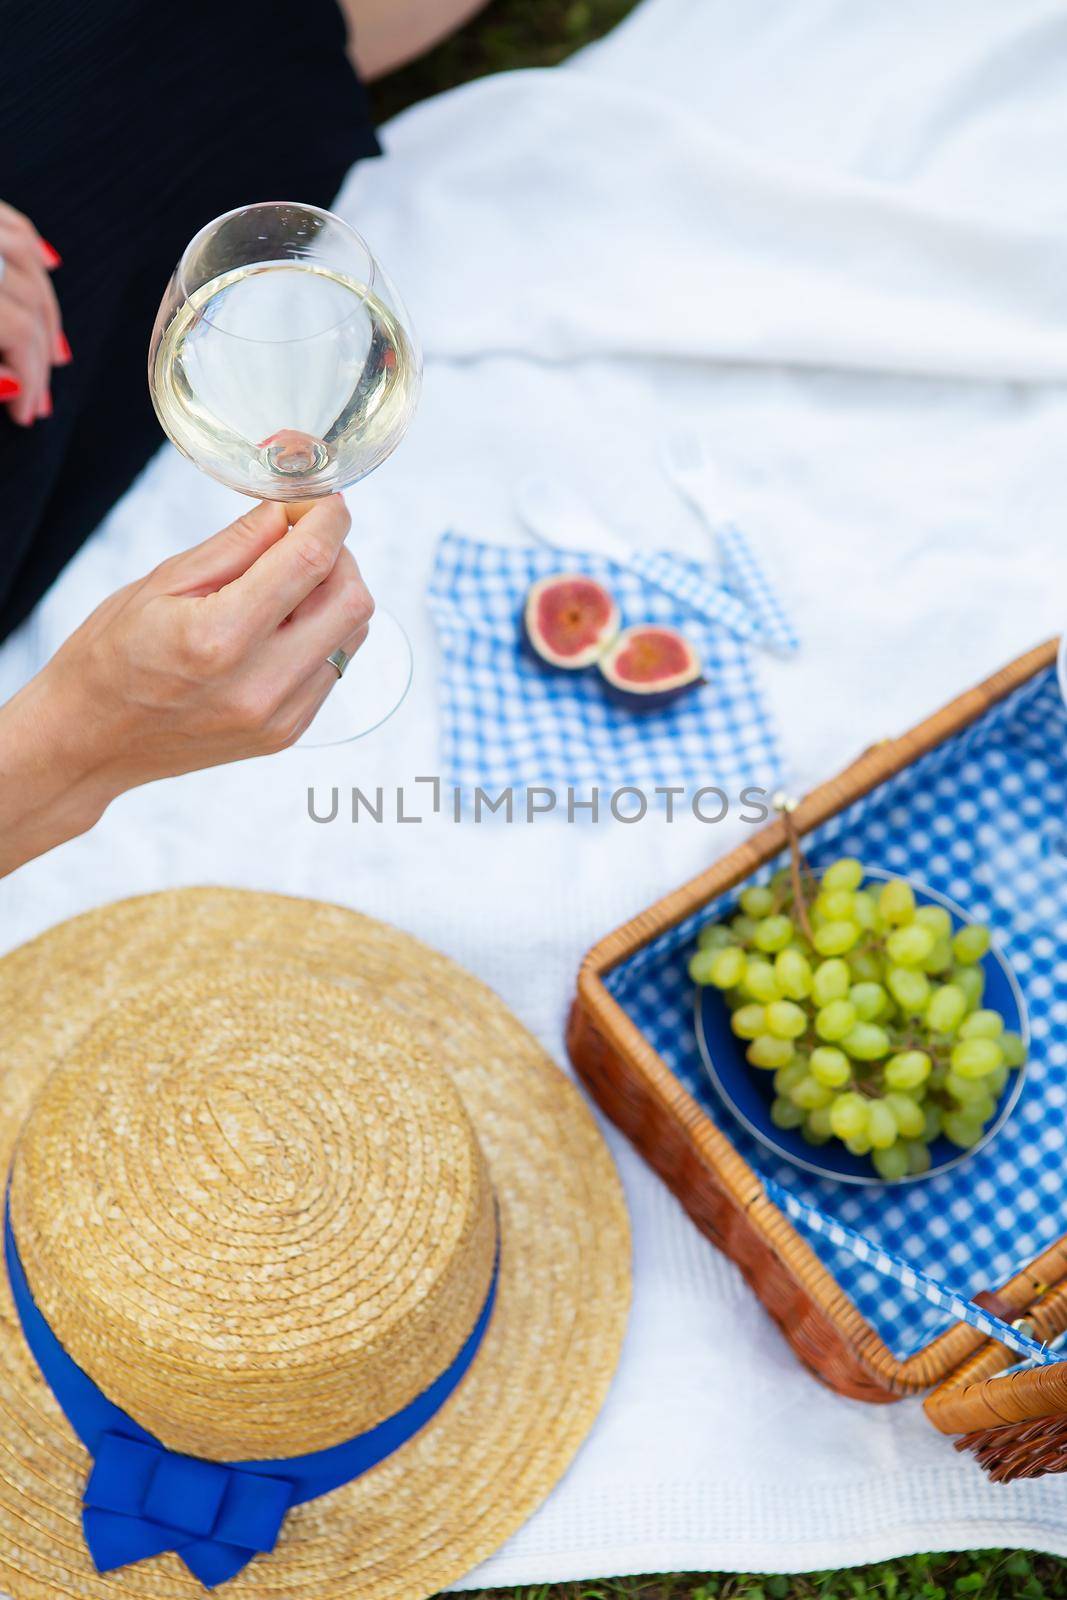 Romantic picnic in the park on the grass, delicious food: basket, wine, grapes, figs, cheese, blue checkered tablecloth, two glasses of wine. The girl is holding a glass of wine in her hands.The concept of outdoor recreation